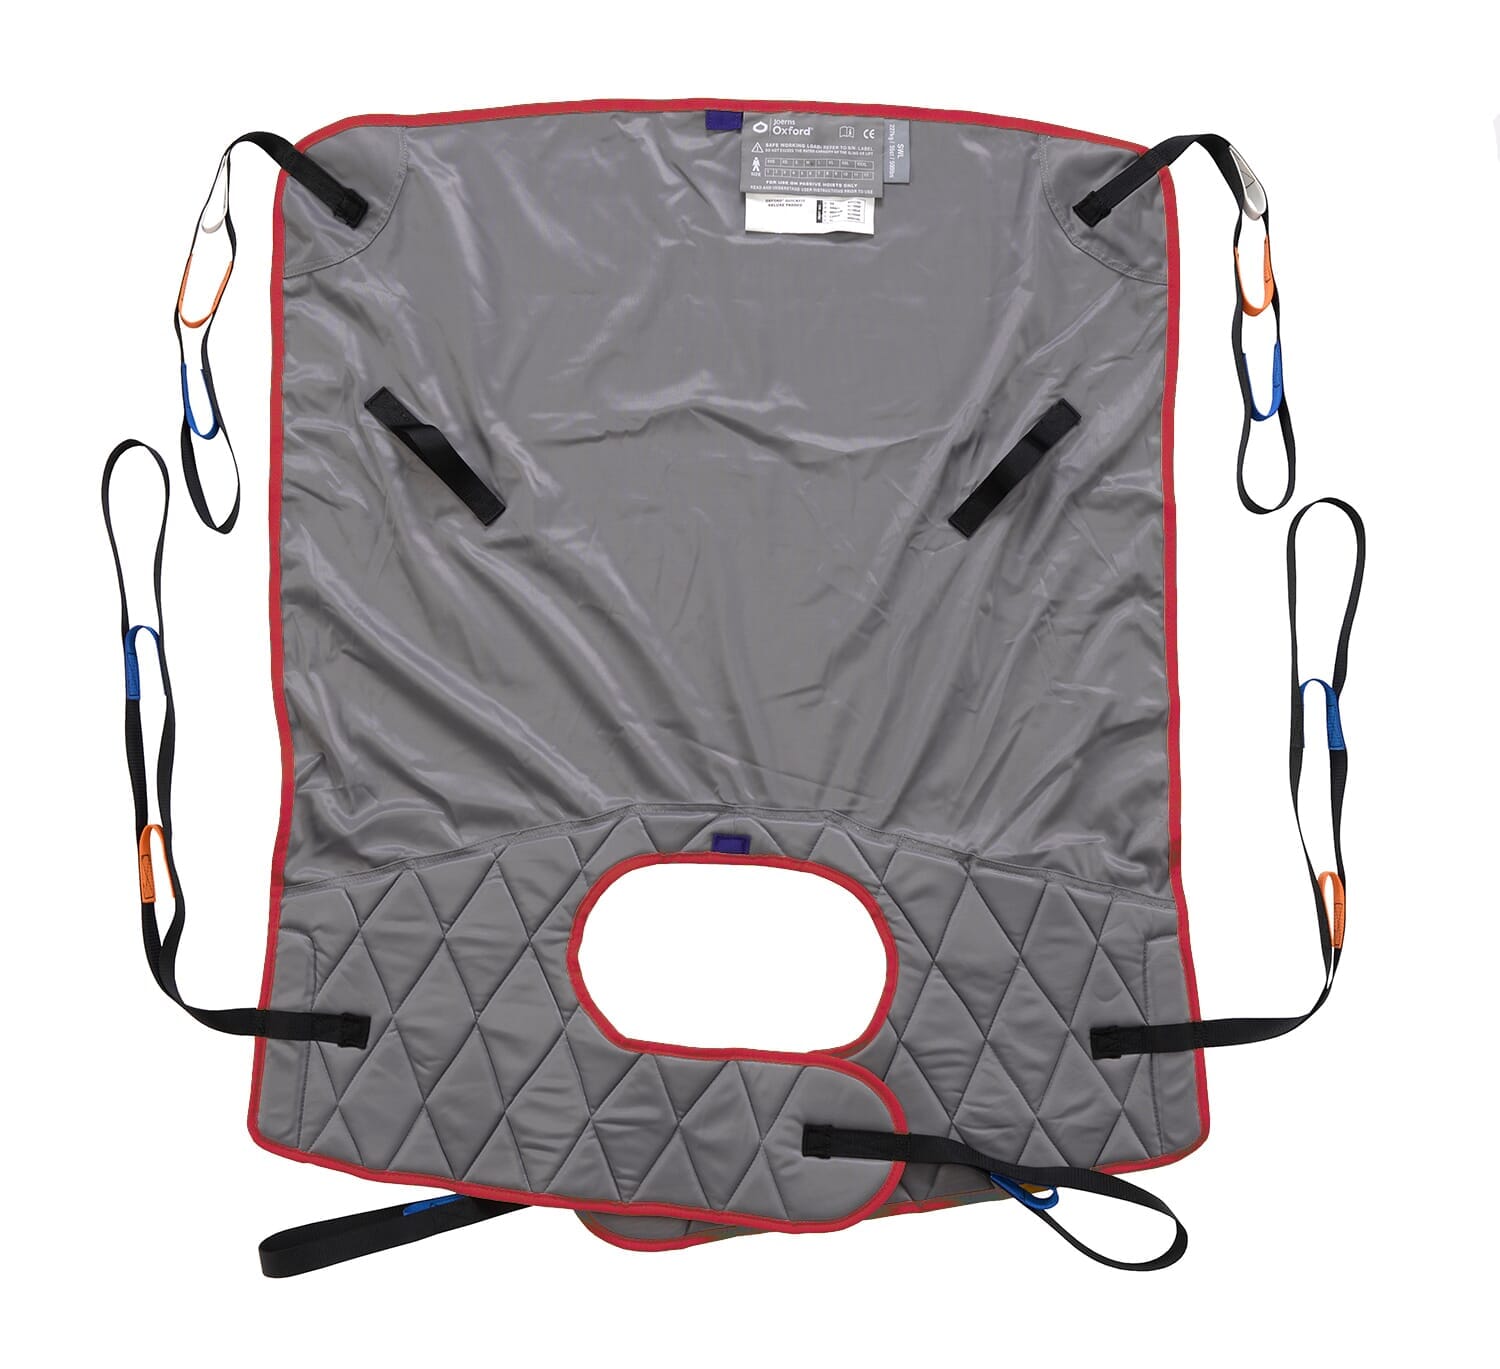 View Oxford Quickfit Deluxe Sling Small with Padded Legs information